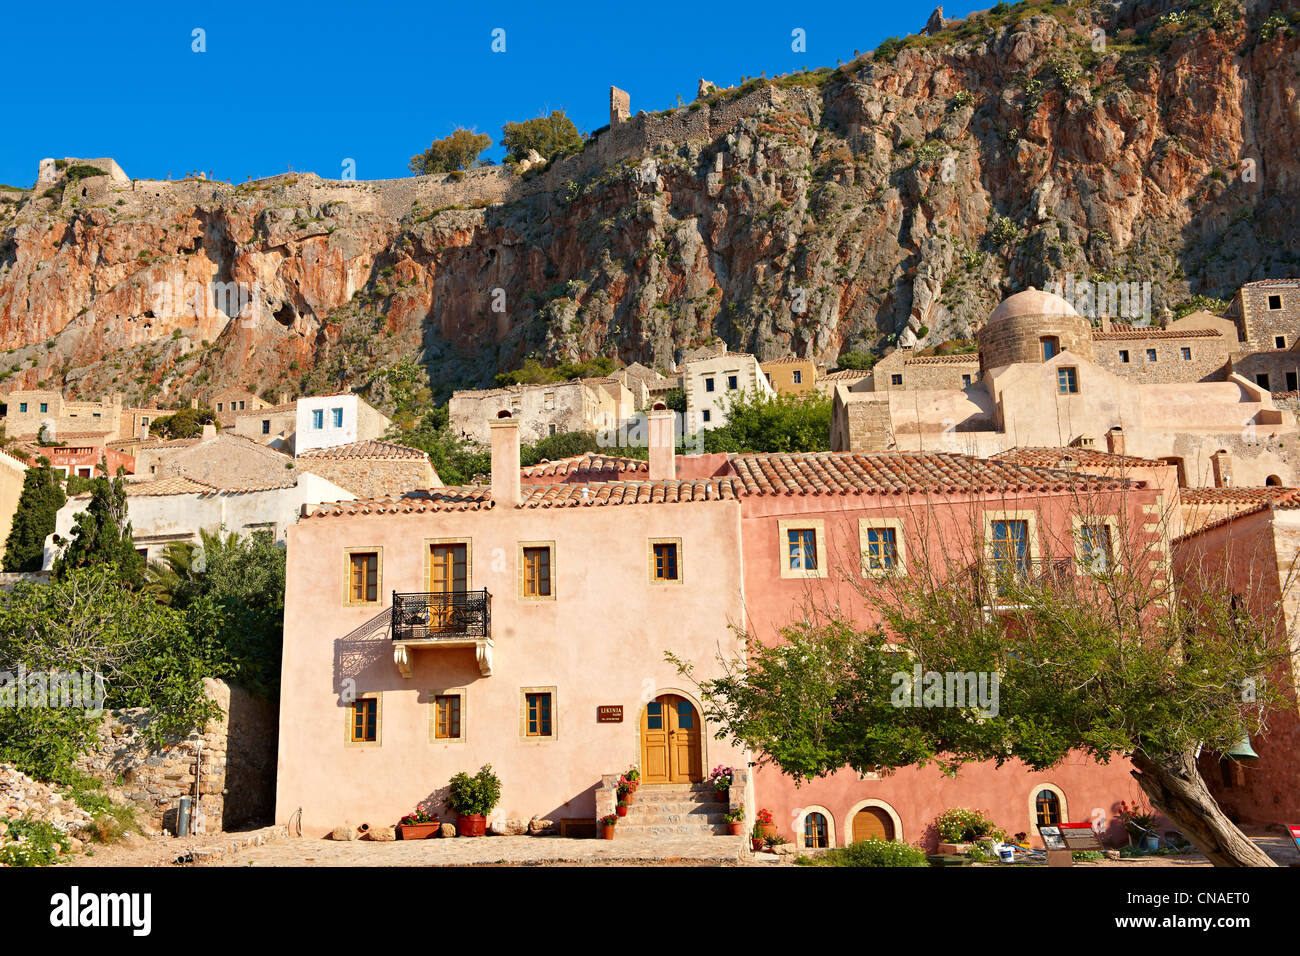 Houses of Monemvasia ( Μονεμβασία ) Byzantine Island castle town with acropolis on the plateau. Peloponnese, Greece Stock Photo